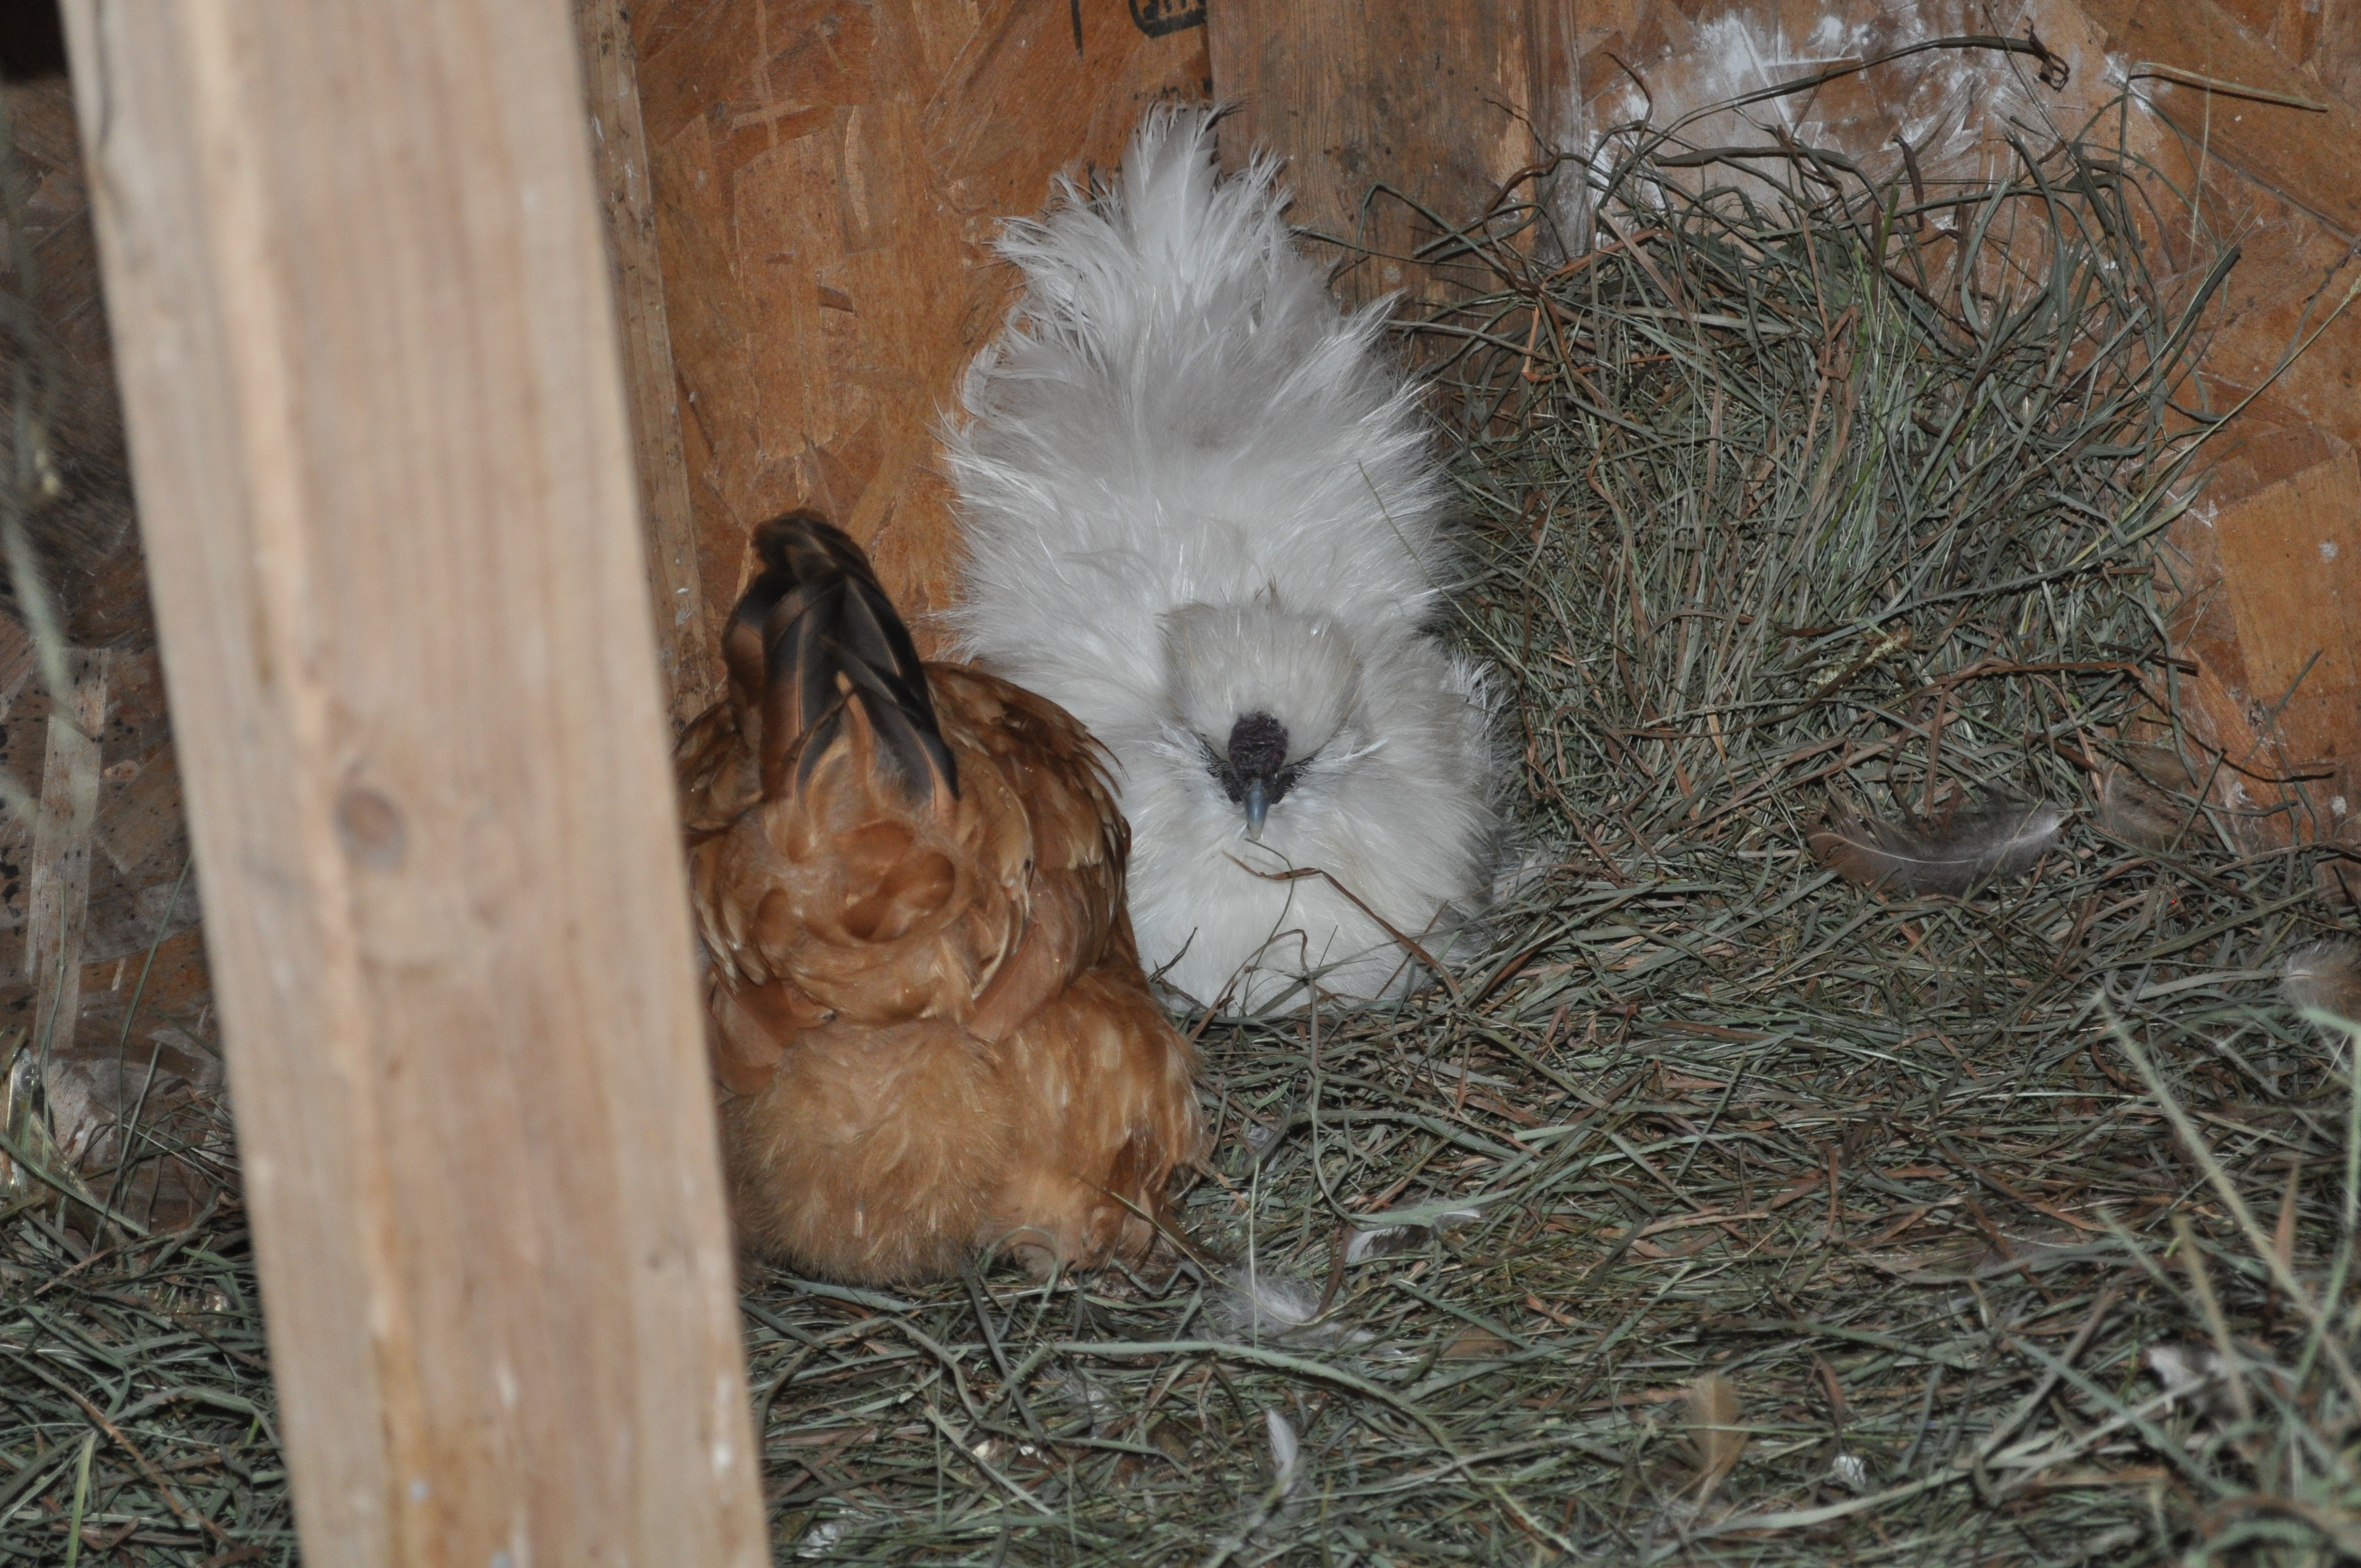 Comet trying to make a nest for emily. SO CUTE!